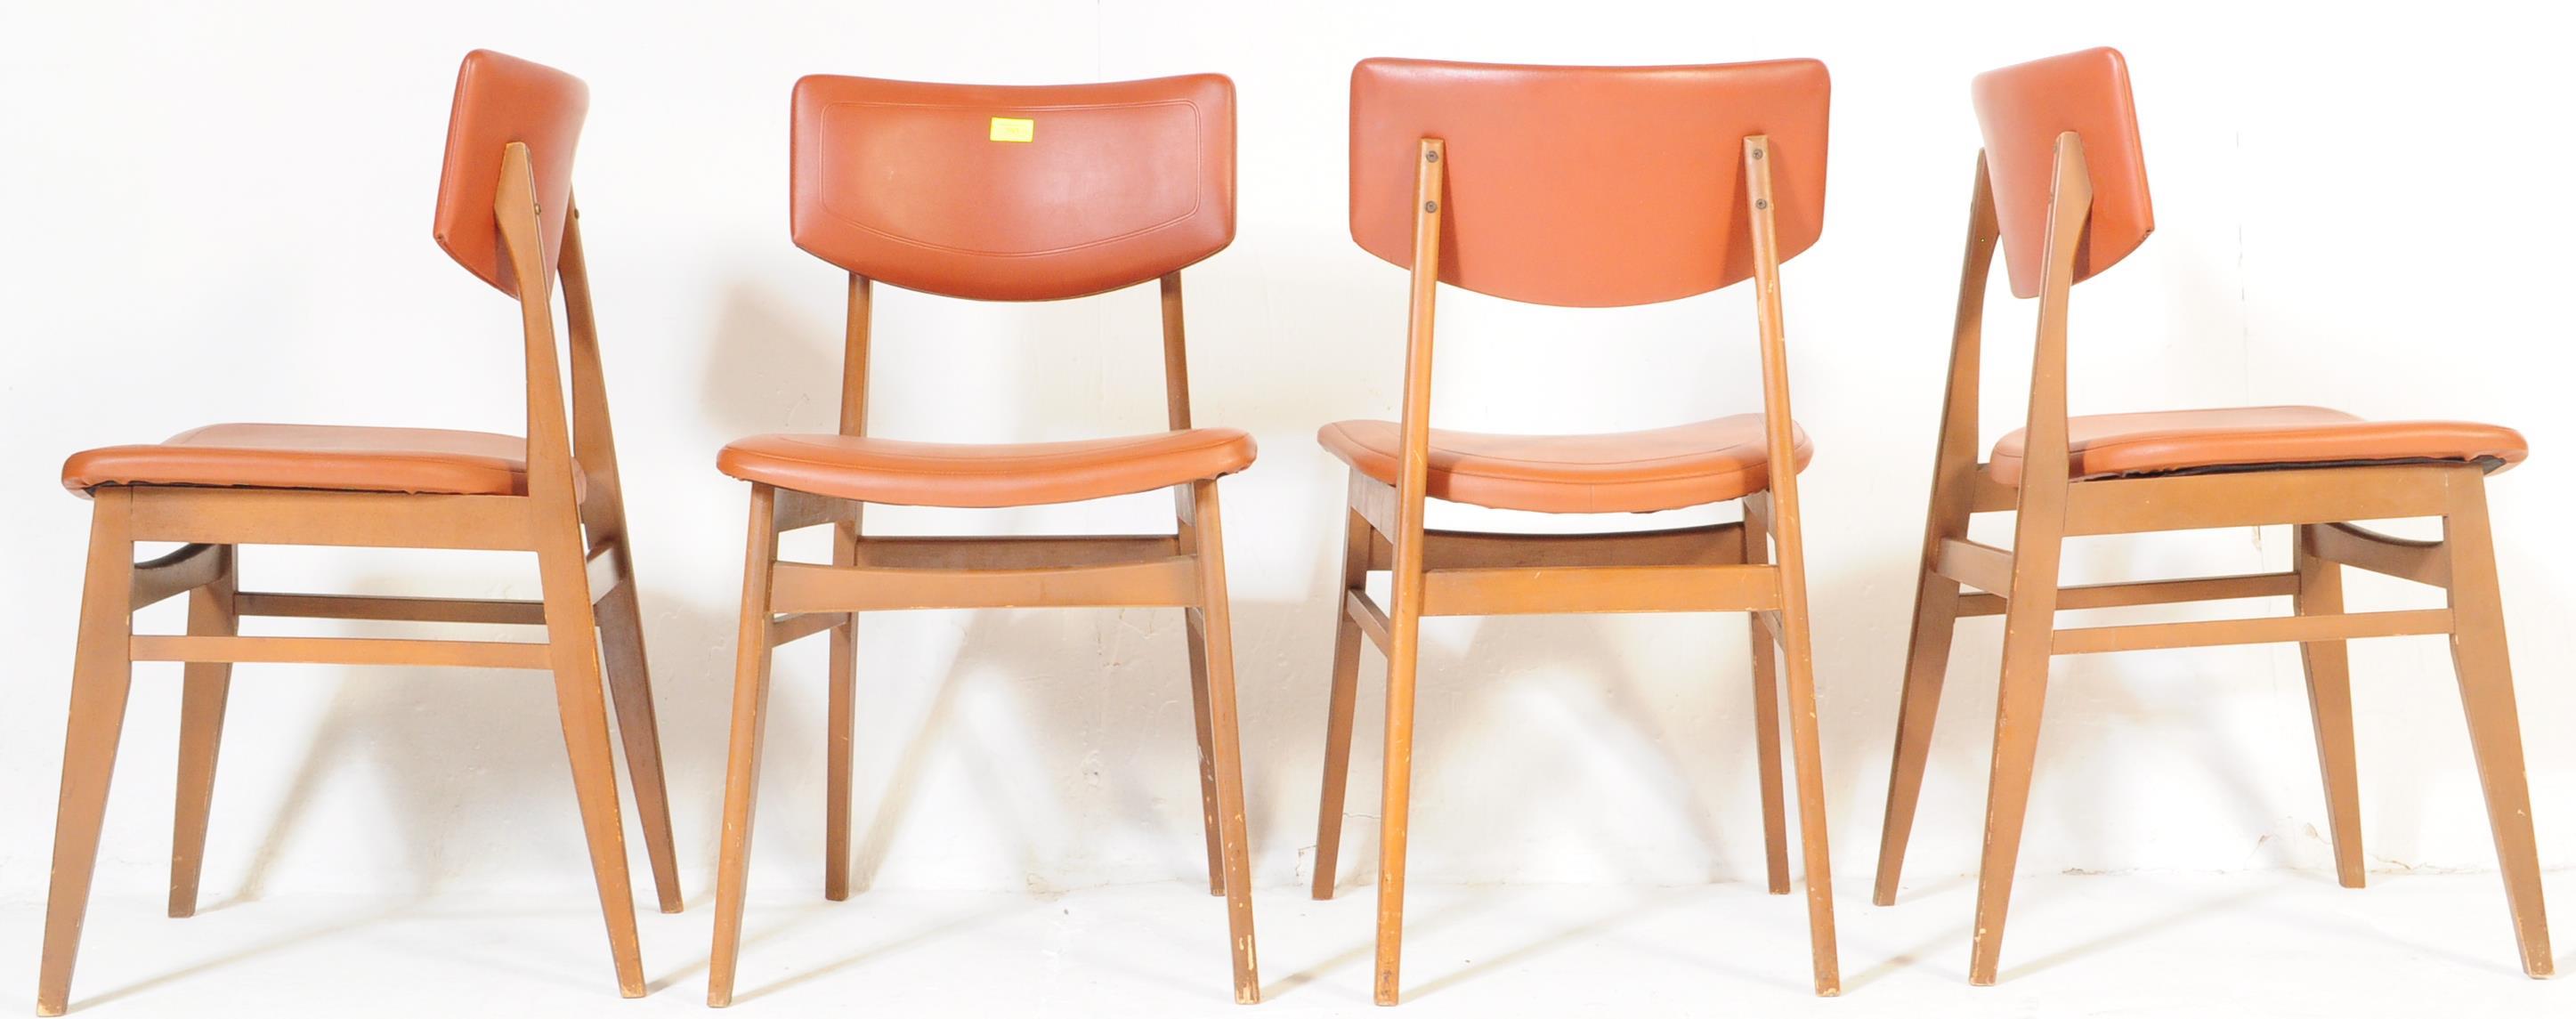 FOUR MID CENTURY TEAK & LEATHERETTE DINING CHAIRS - Image 3 of 3